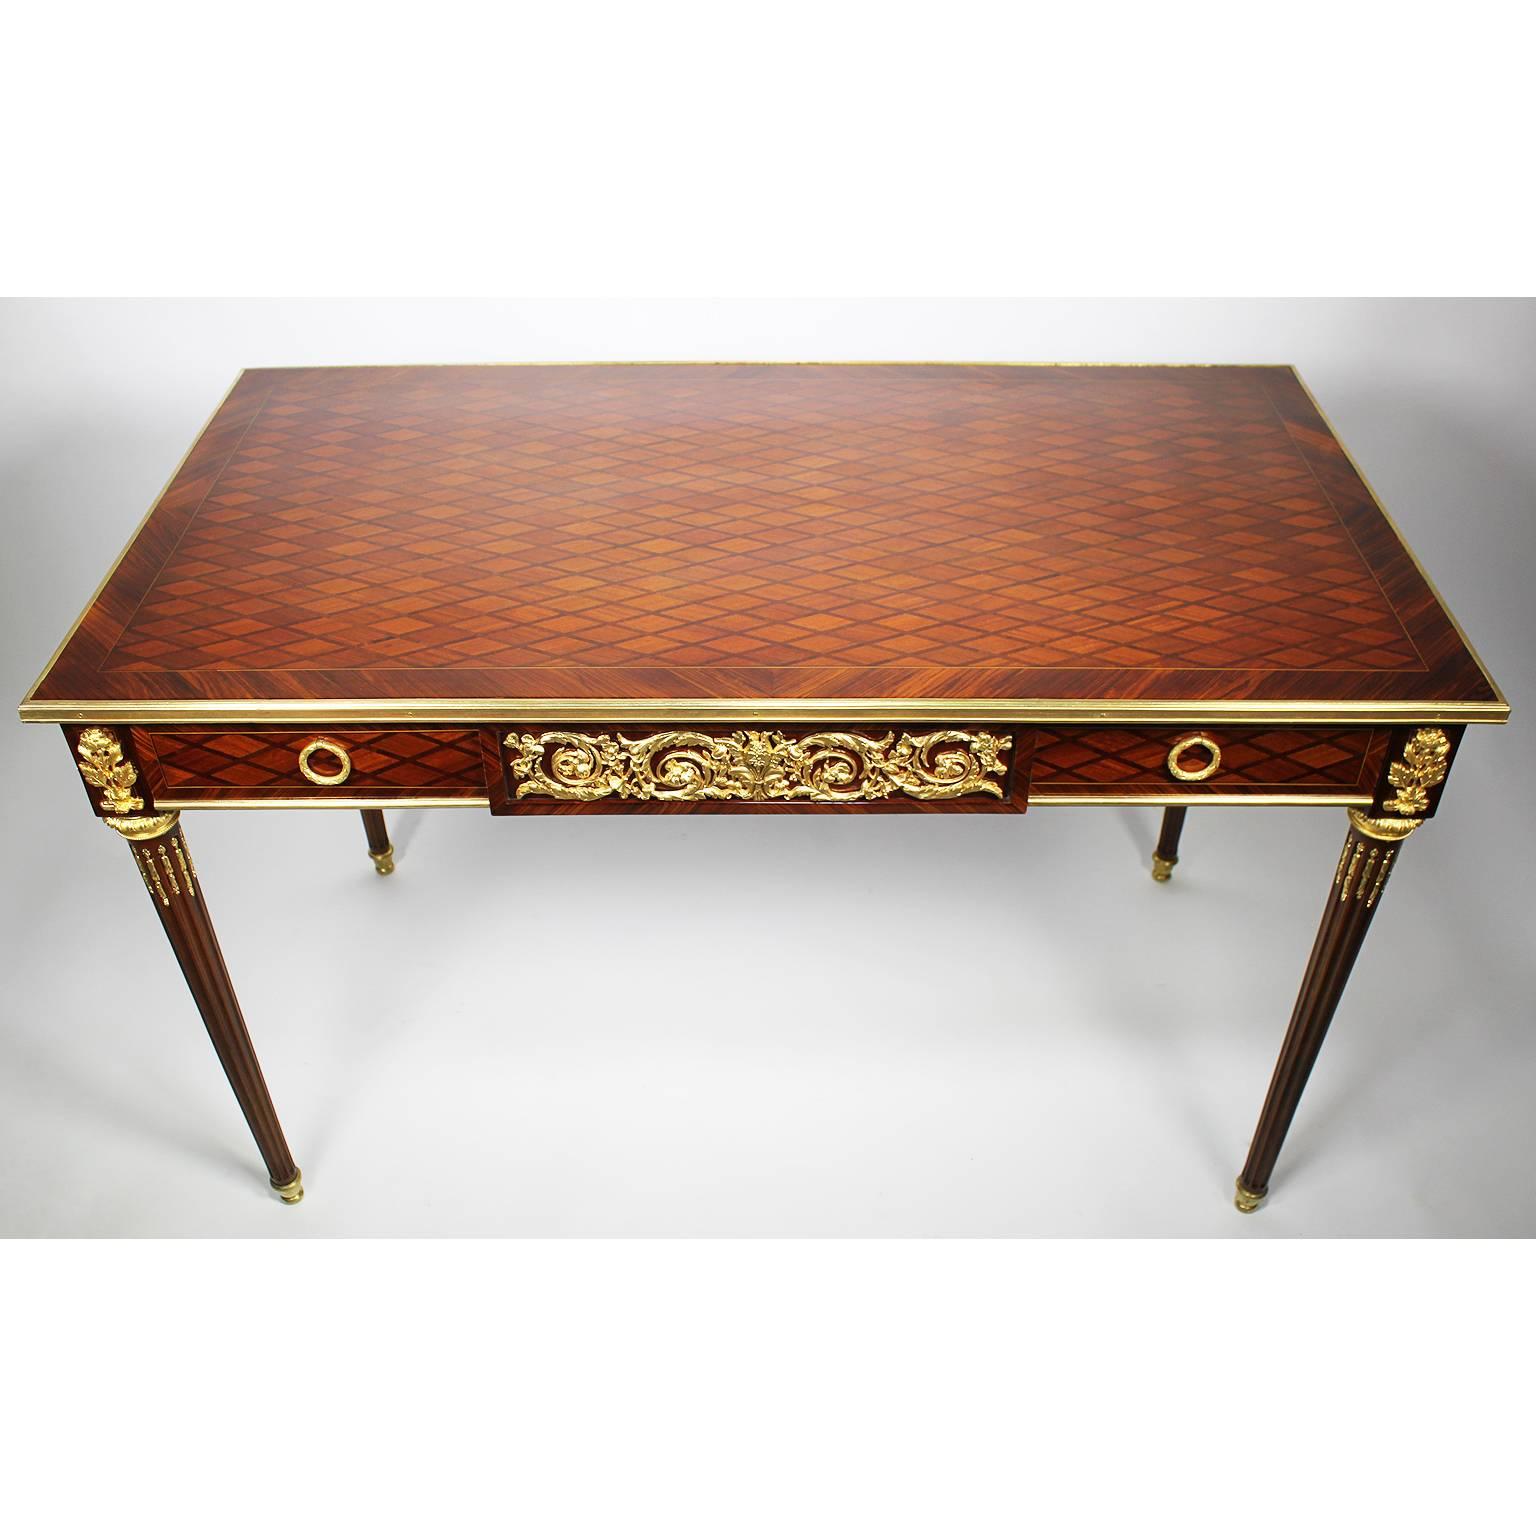 A very fine French 19th-20th century louis XVI style kingwood parquetry and ormolu-mounted ladies writing table, the body surrounded by bronze moldings. The apron repeats the parquetry pattern and is fitted with one drawer having scrolled acanthus